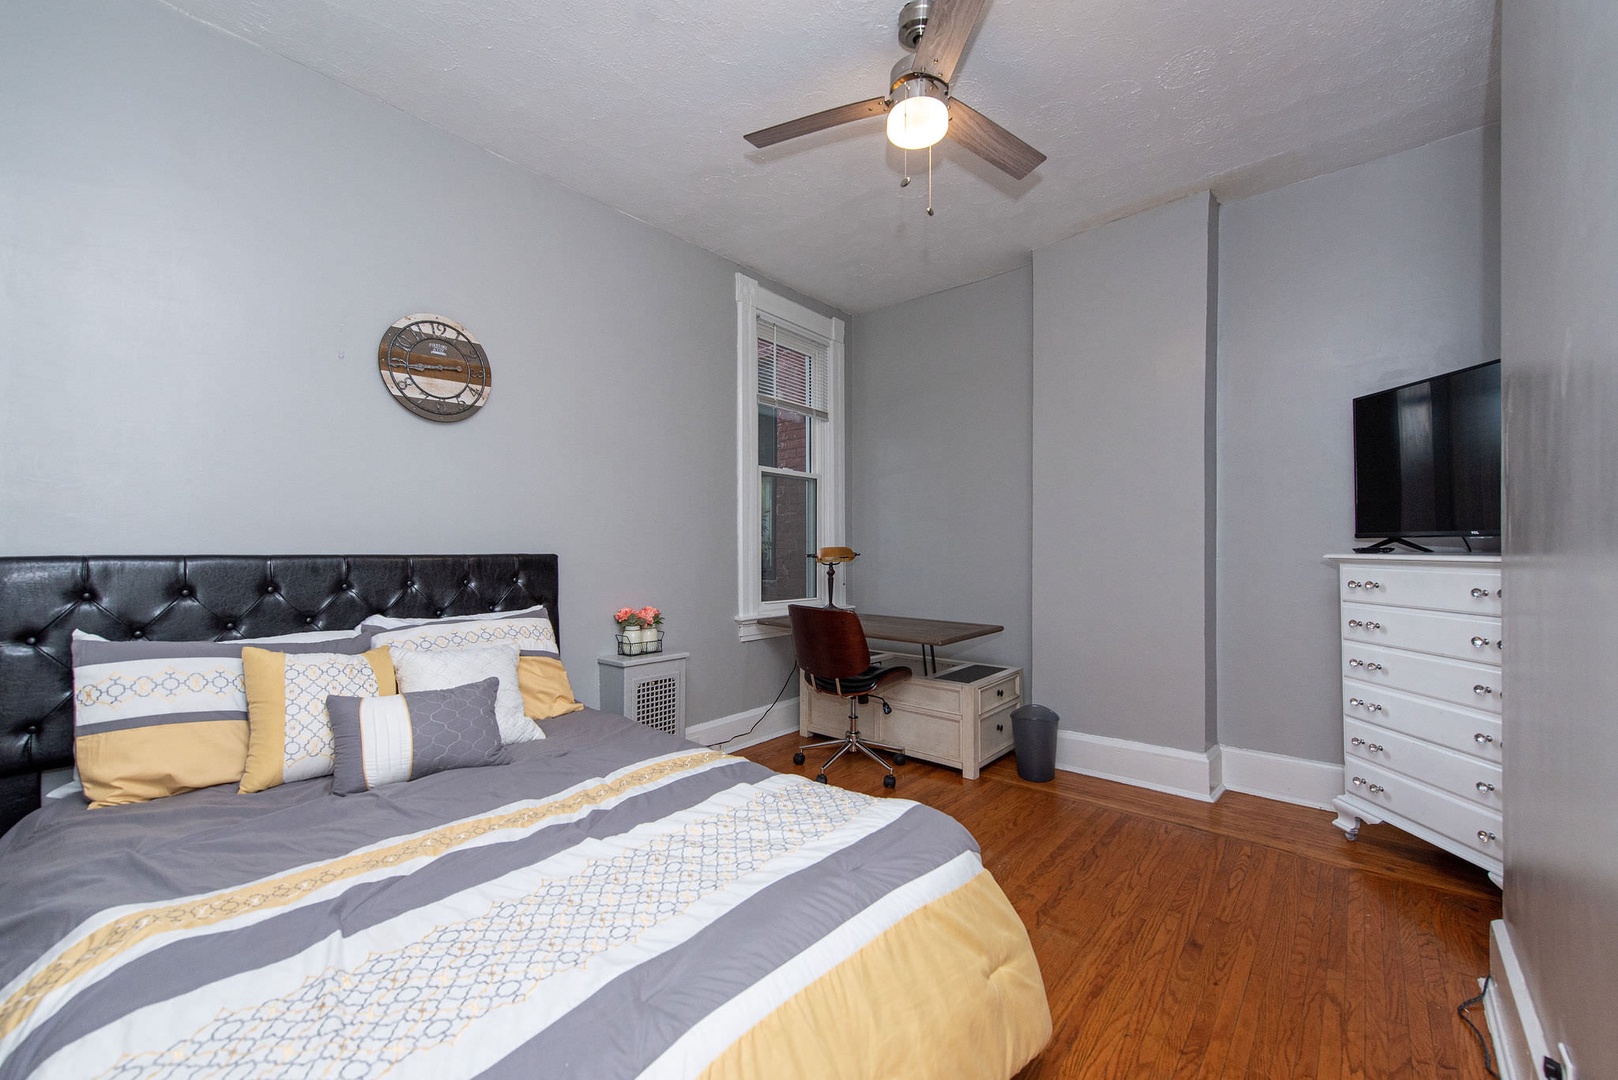 Suite 1 – The 2nd of 3 bedrooms offers a full bed, Smart TV, & desk/workspace